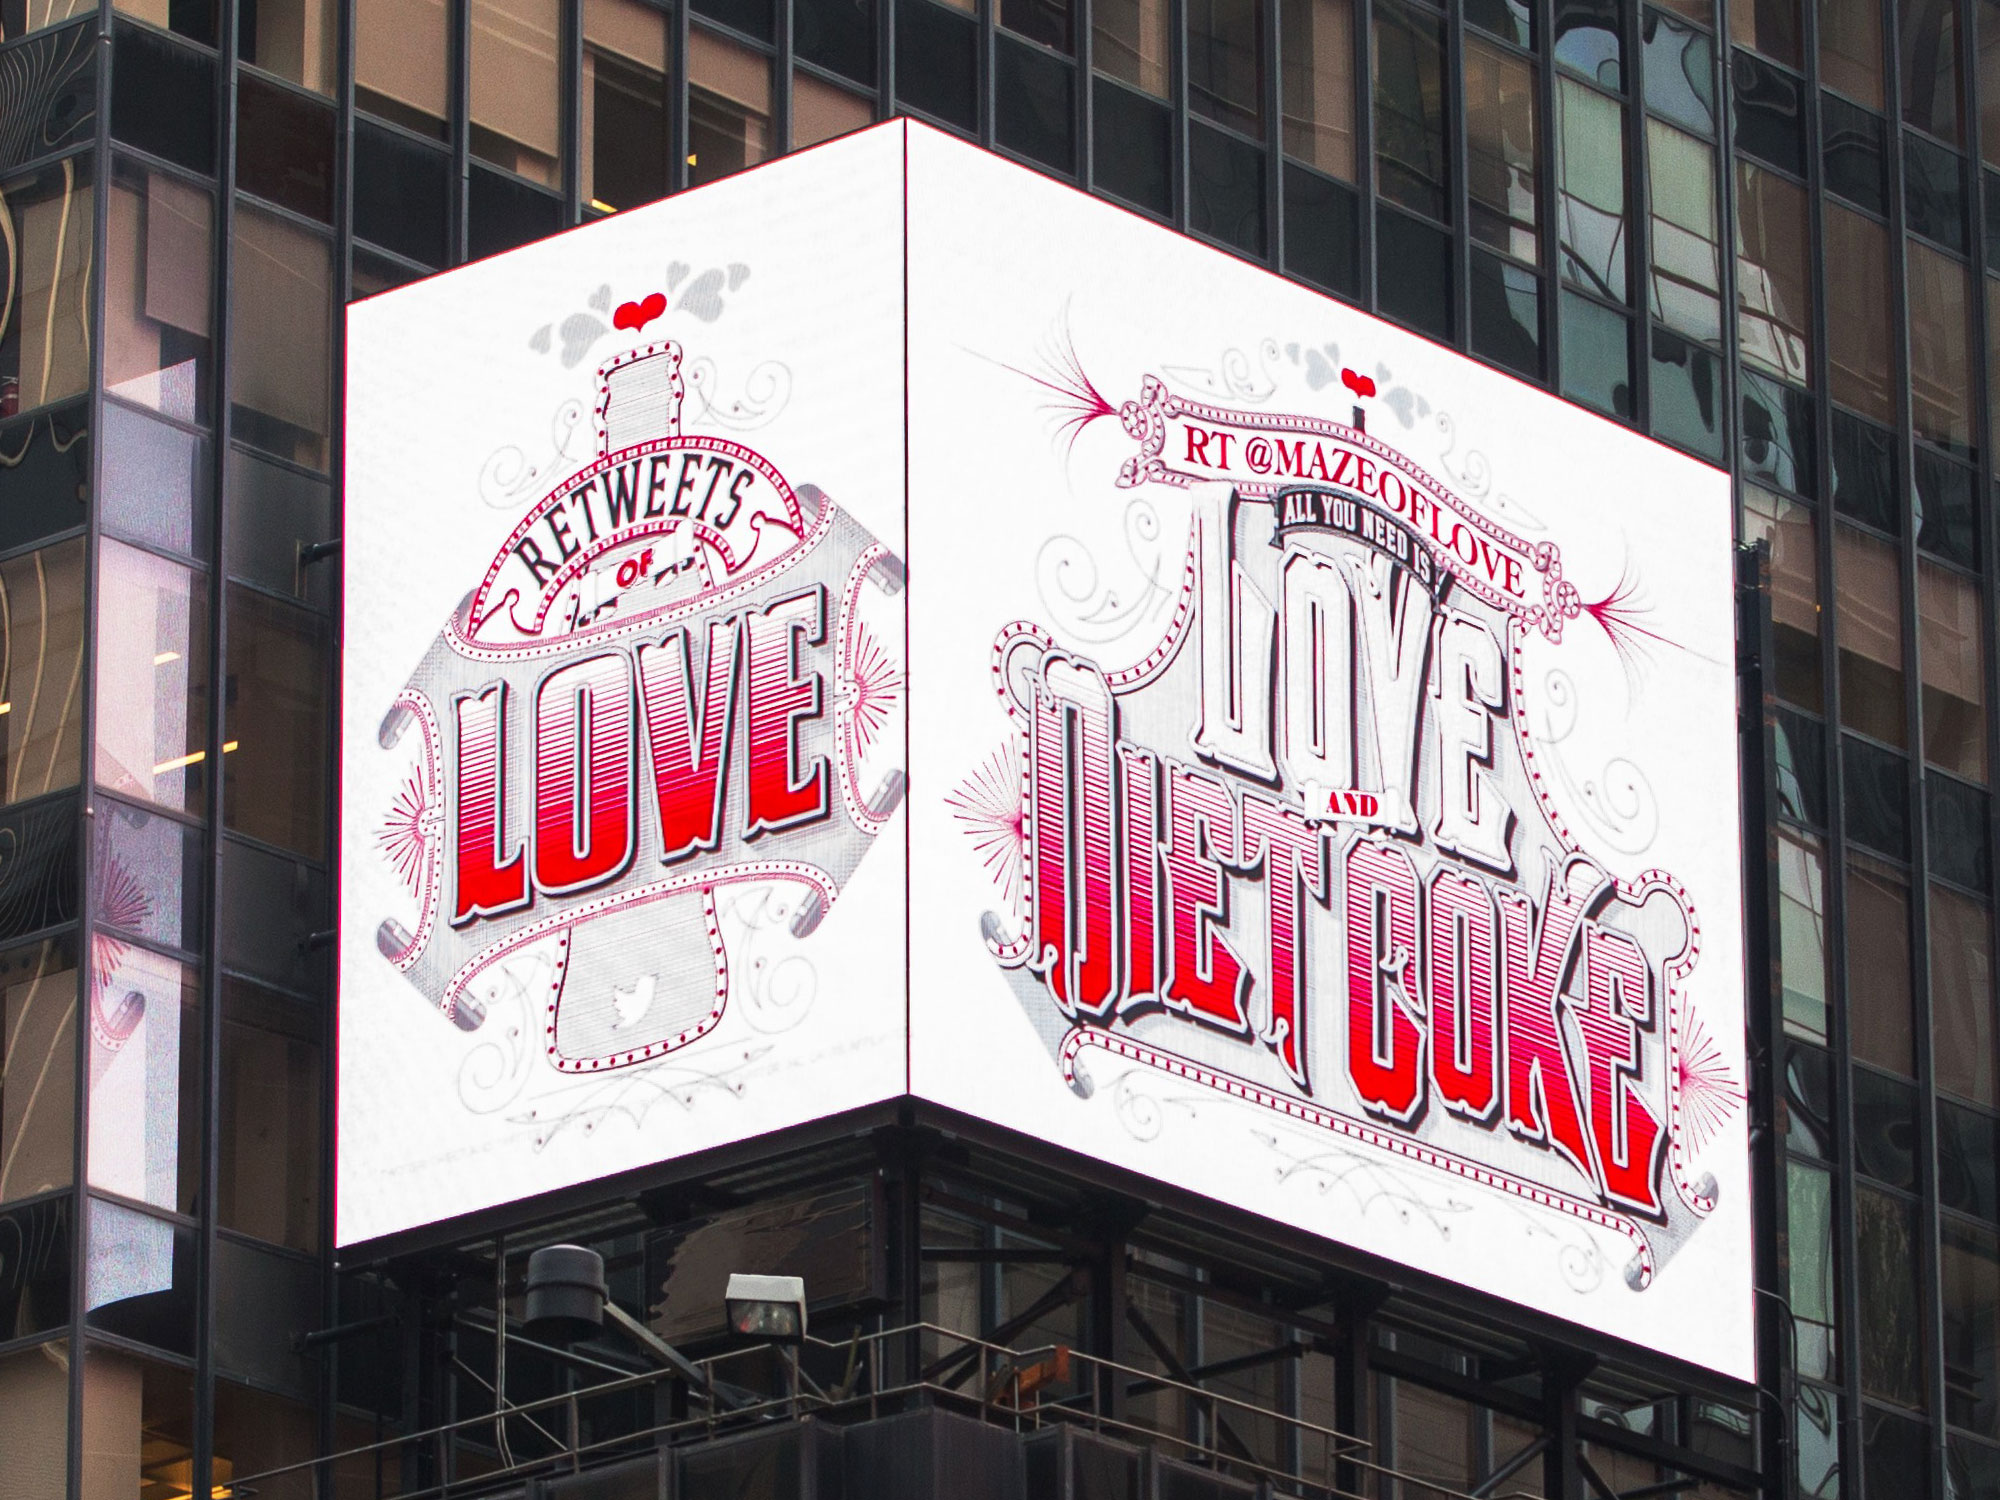 Diet Coke Is Retweeting Its Biggest Fans in Suddenly Extravagant Ways